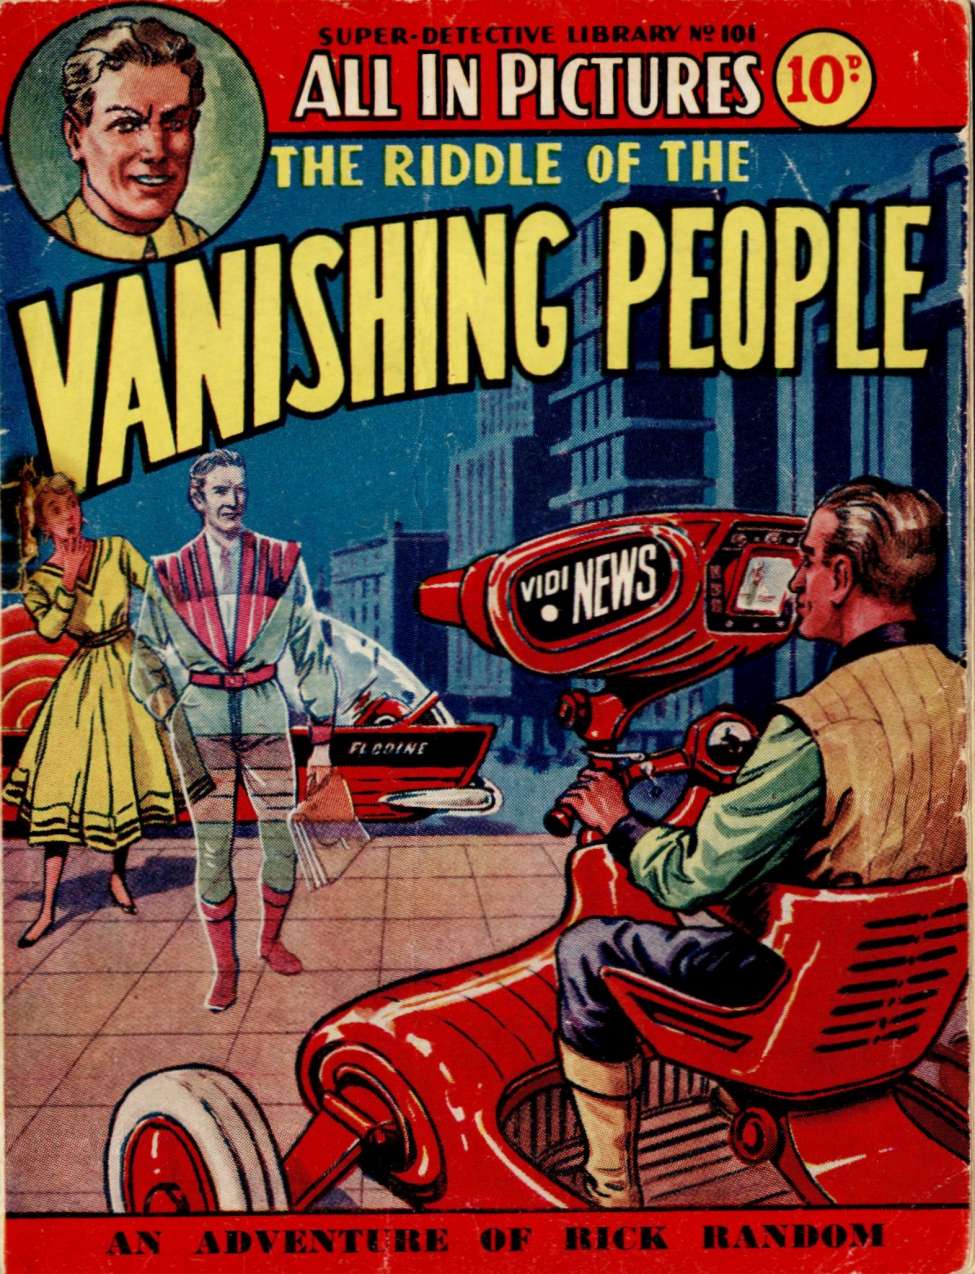 Comic Book Cover For Super Detective Library 101 - The Riddle of the Vanishing People